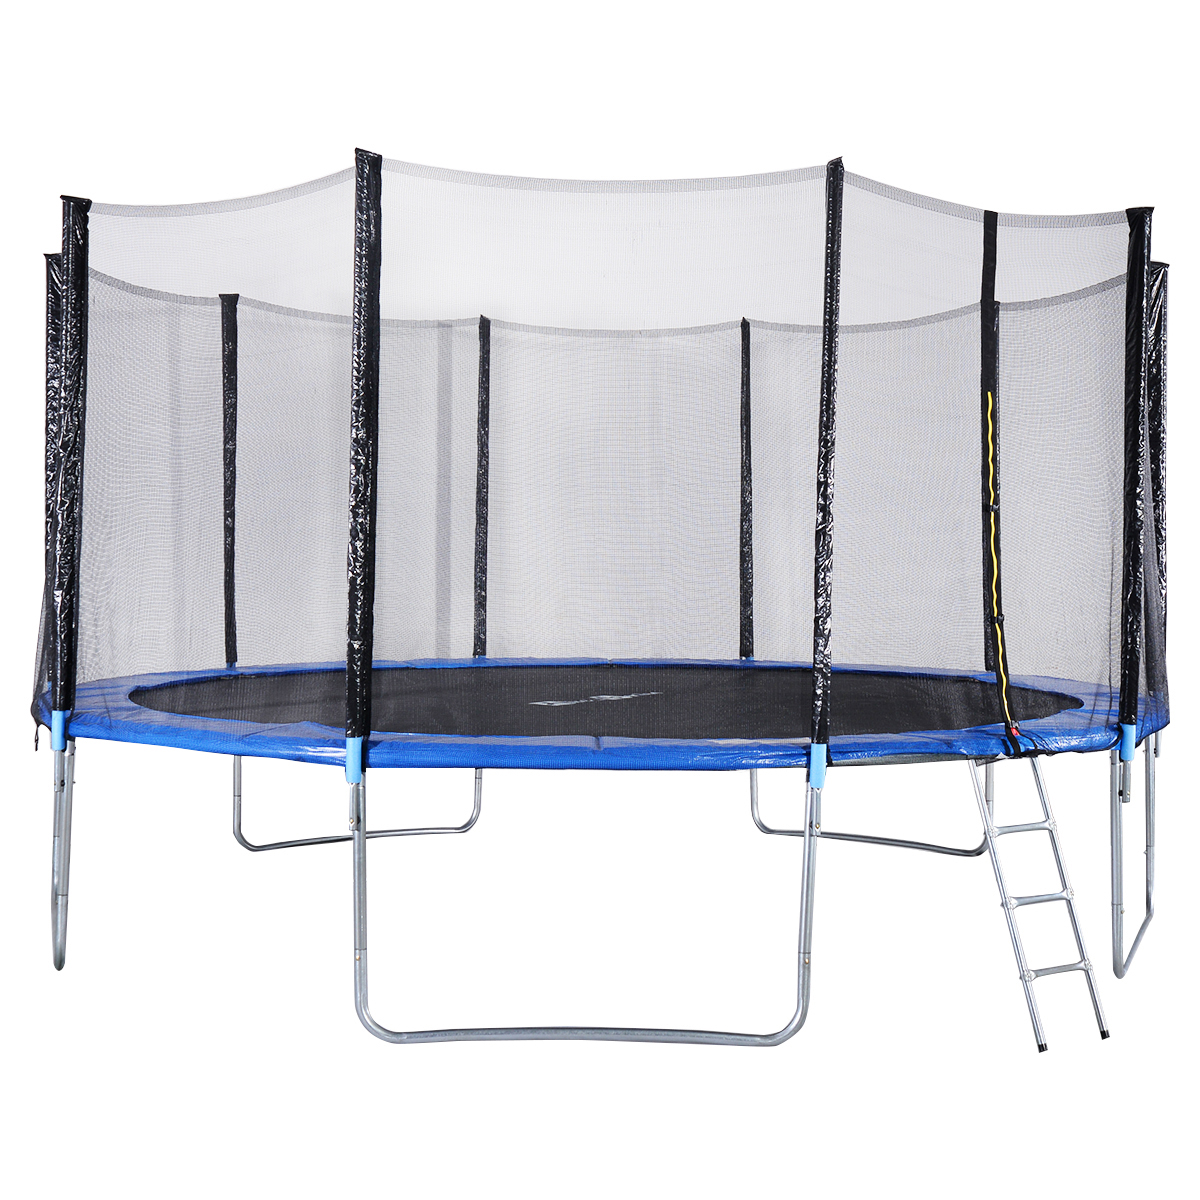 Gymax 15 FT Trampoline Combo Bounce Jump Safety Enclosure Net - image 2 of 10